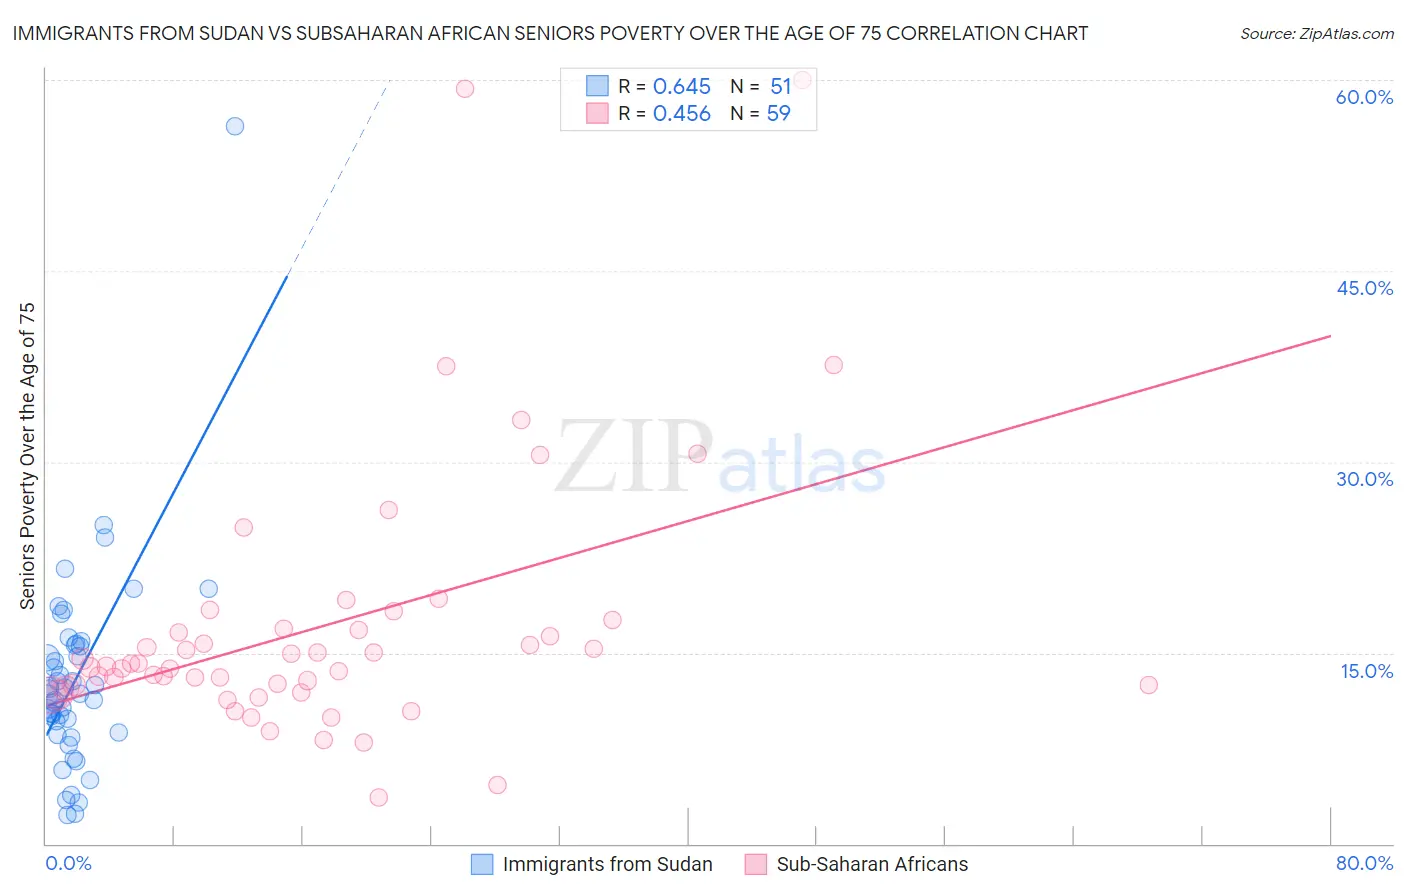 Immigrants from Sudan vs Subsaharan African Seniors Poverty Over the Age of 75